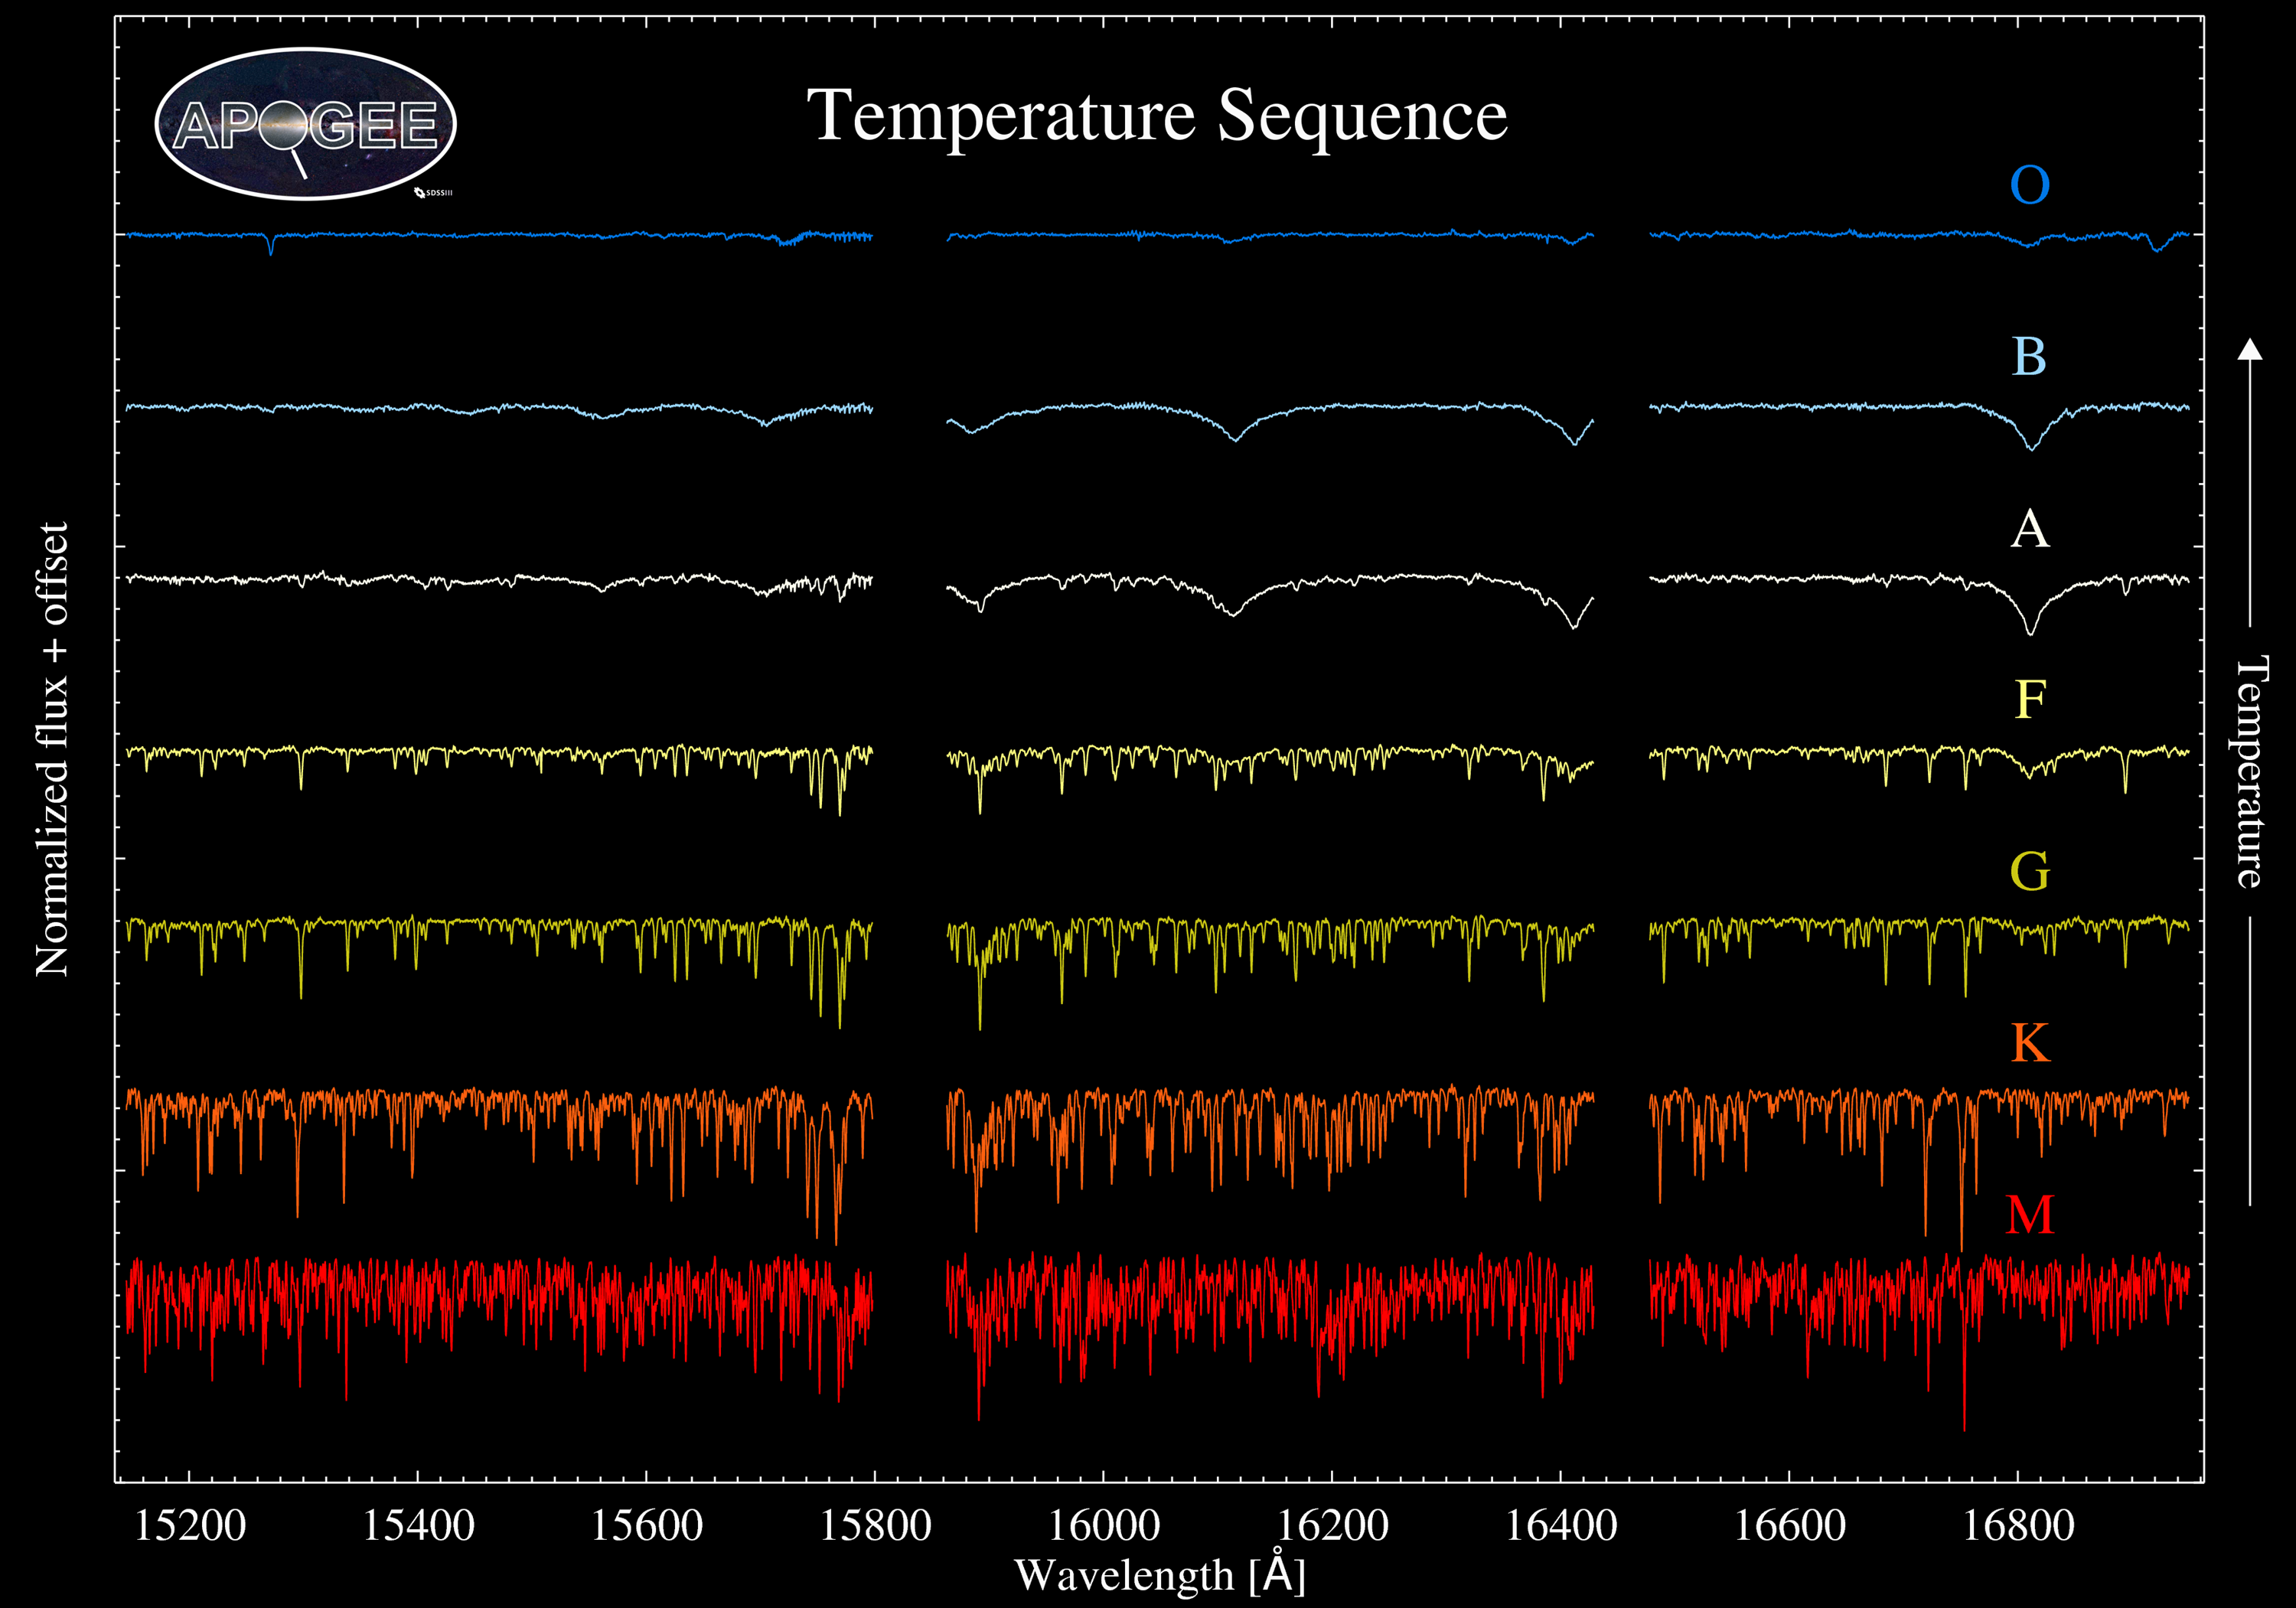 Sample APOGEE spectra for stars of different spectral types. Gaps in the spectra correspond to gaps in detector coverage. Click for a larger view.